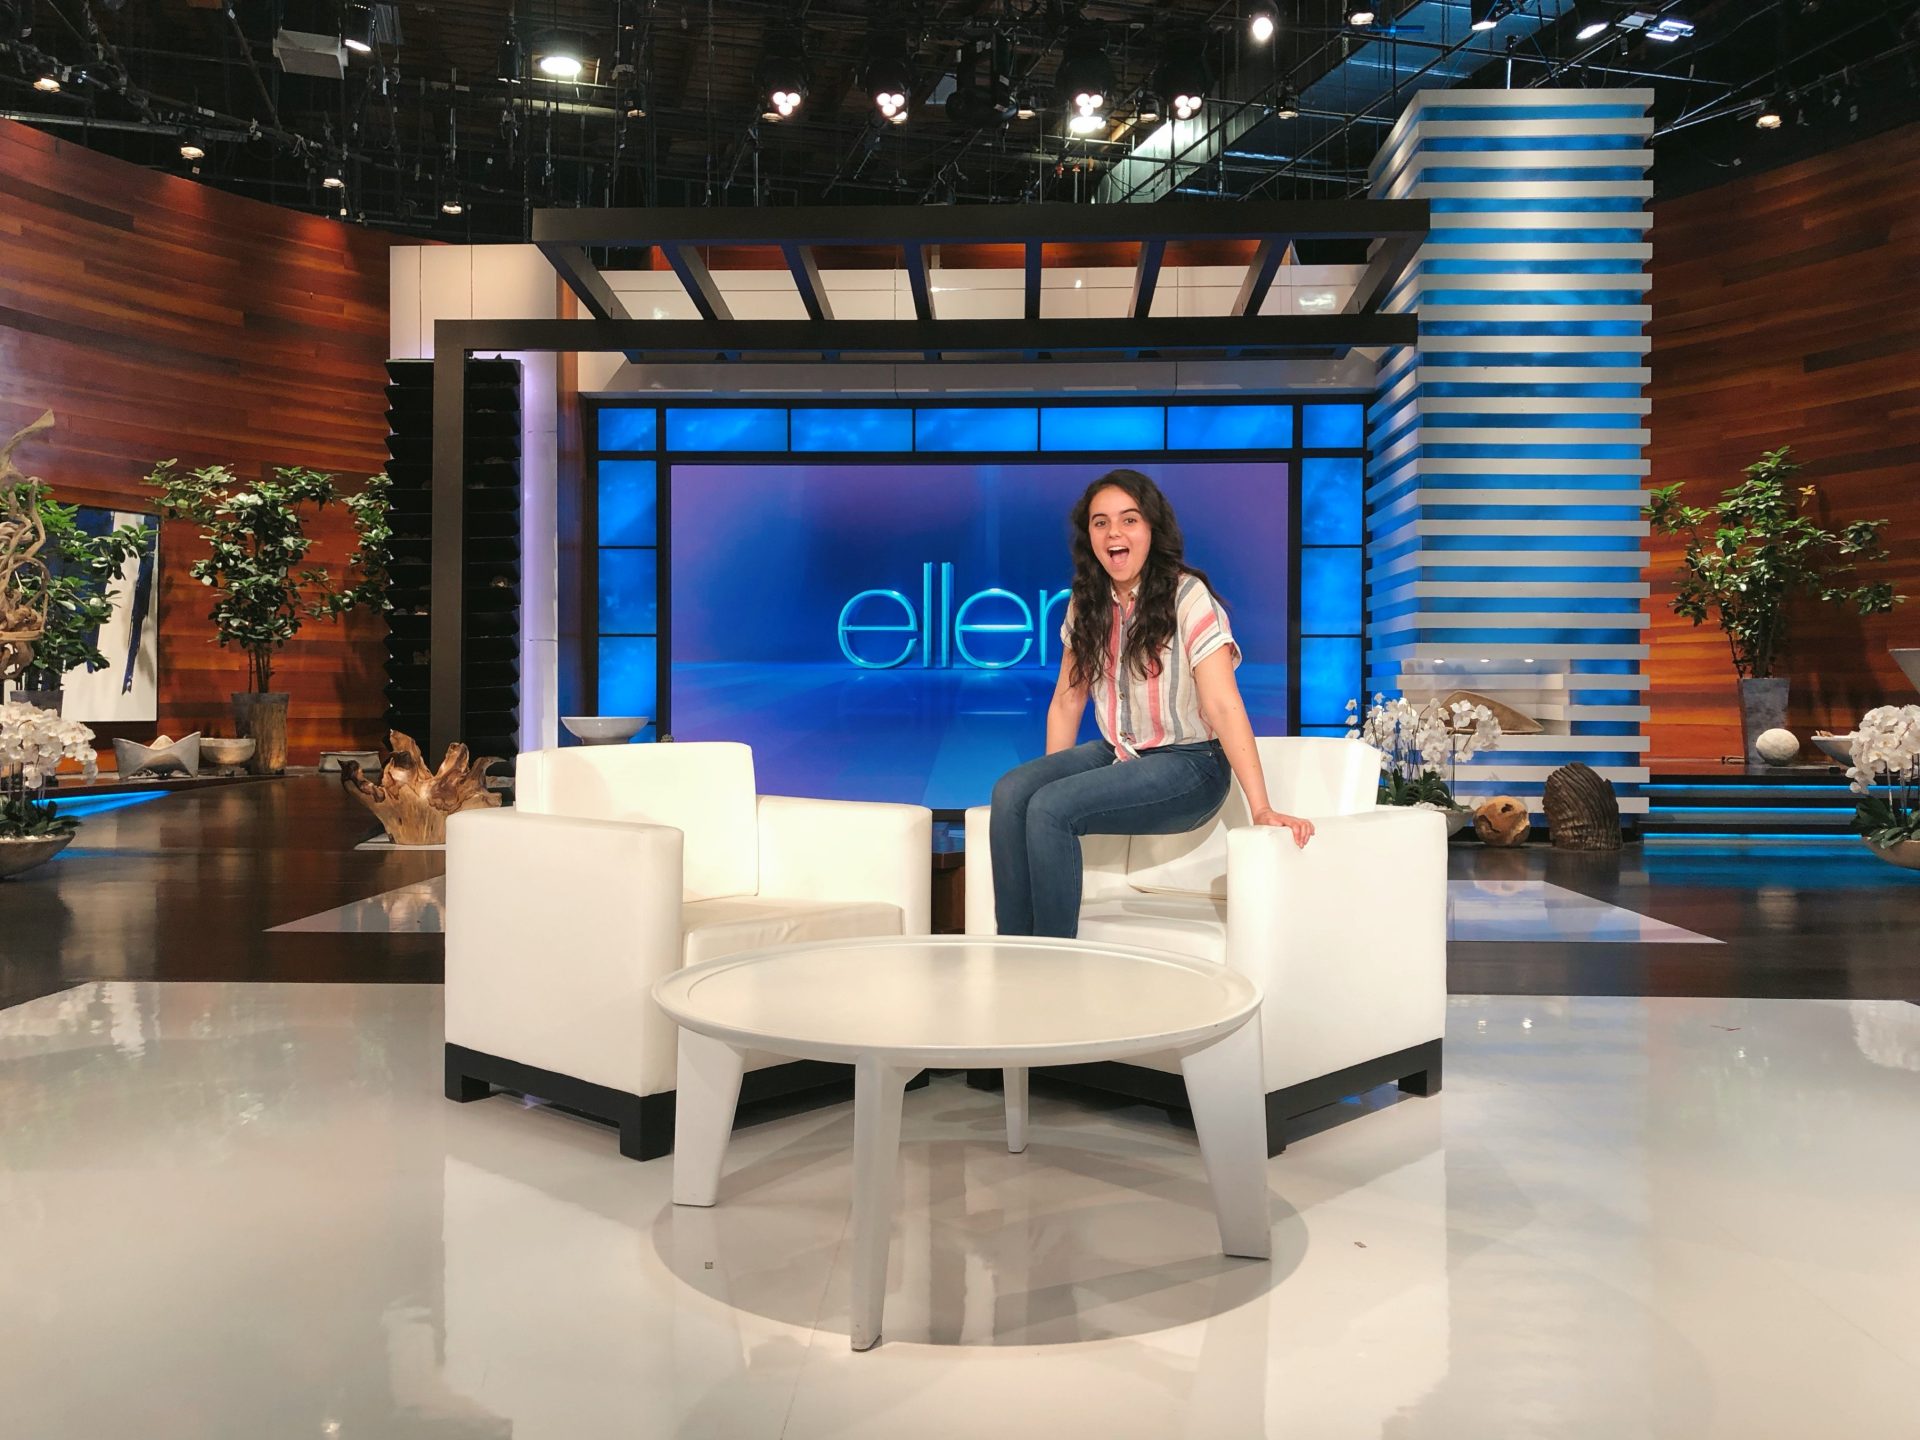 Rowan Journalism and RTF major Victoria Todorova sitting on "The Ellen Show" chair at the studio.